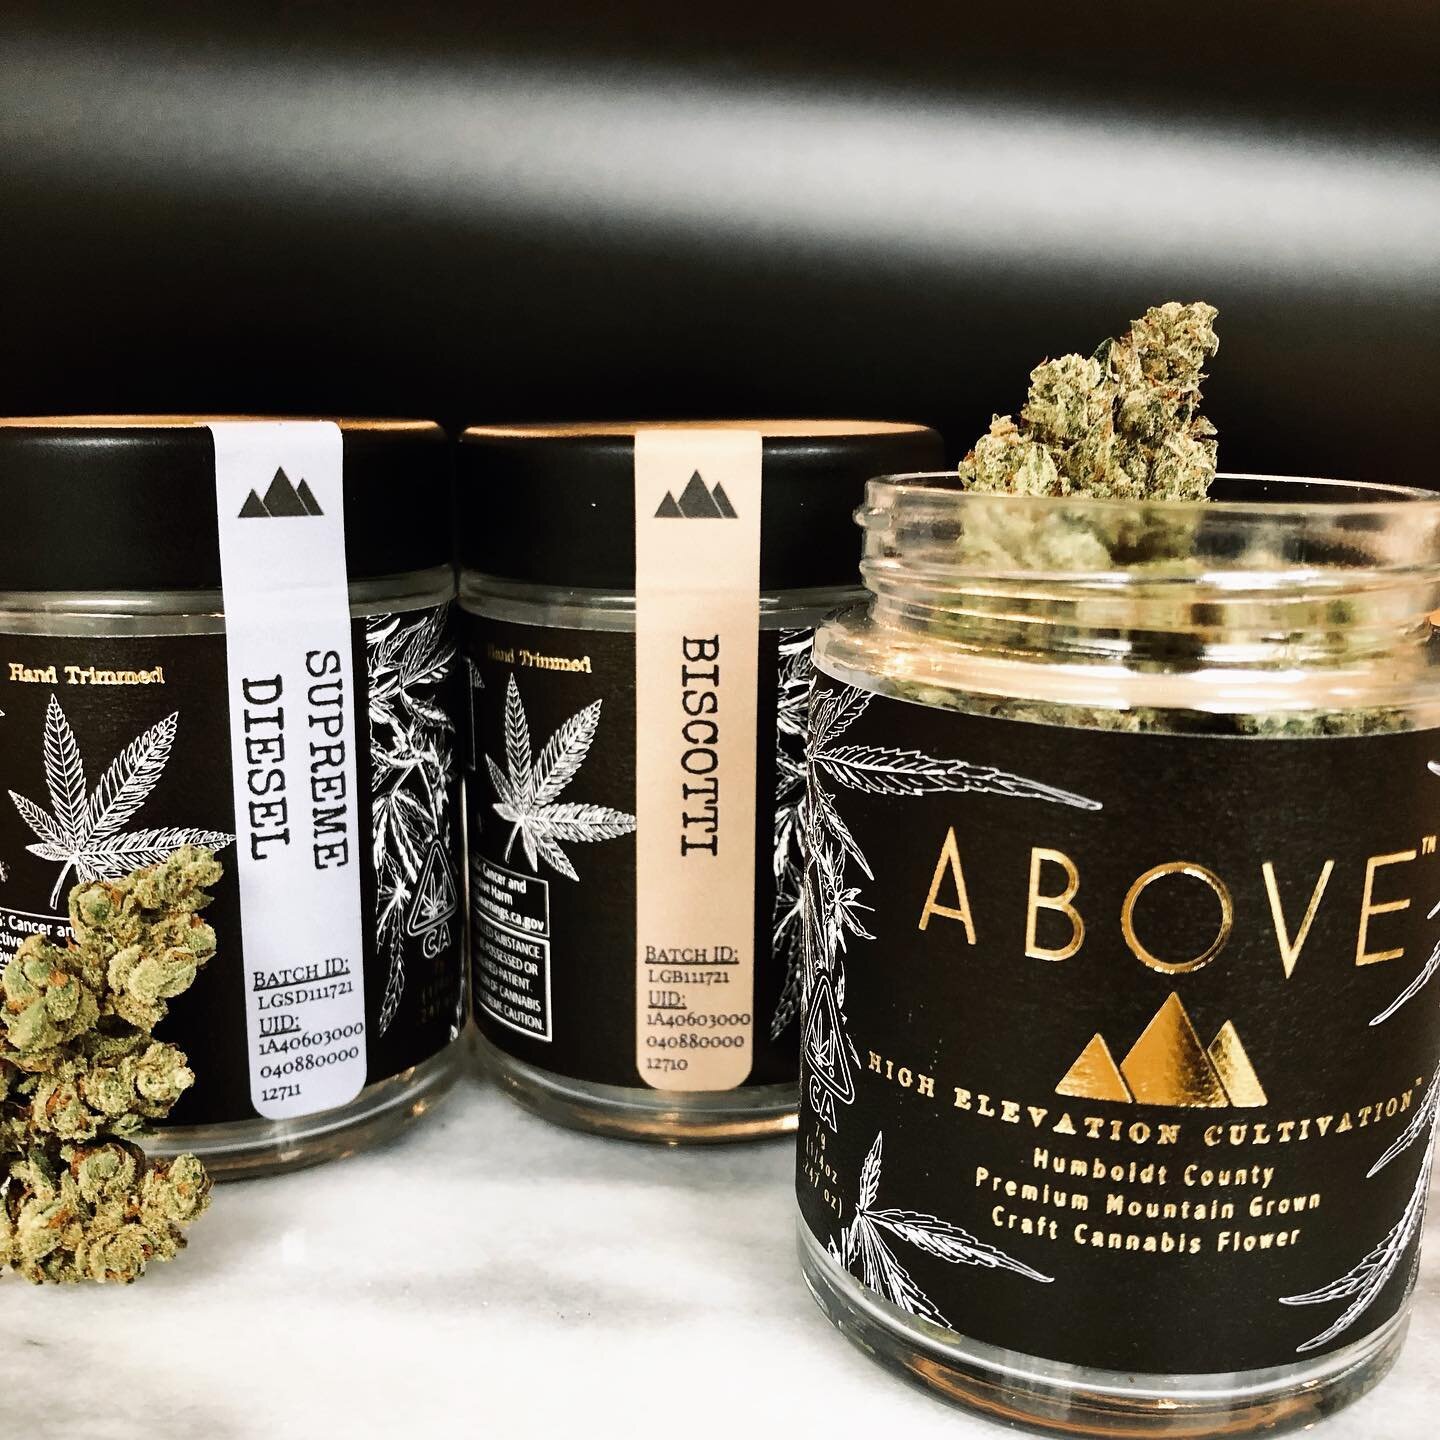 ✨I N T R O D U C I N G ! ! !✨

Quarter oz Jars of ABOVE Premium Flower!🪴
.
Love our pre-rolls?&hellip;. Now there are even more ways to enjoy our premium sun grown flower.  Bong&hellip;pipe&hellip;bubbler&hellip;.roll your own&hellip;.oh the possibi